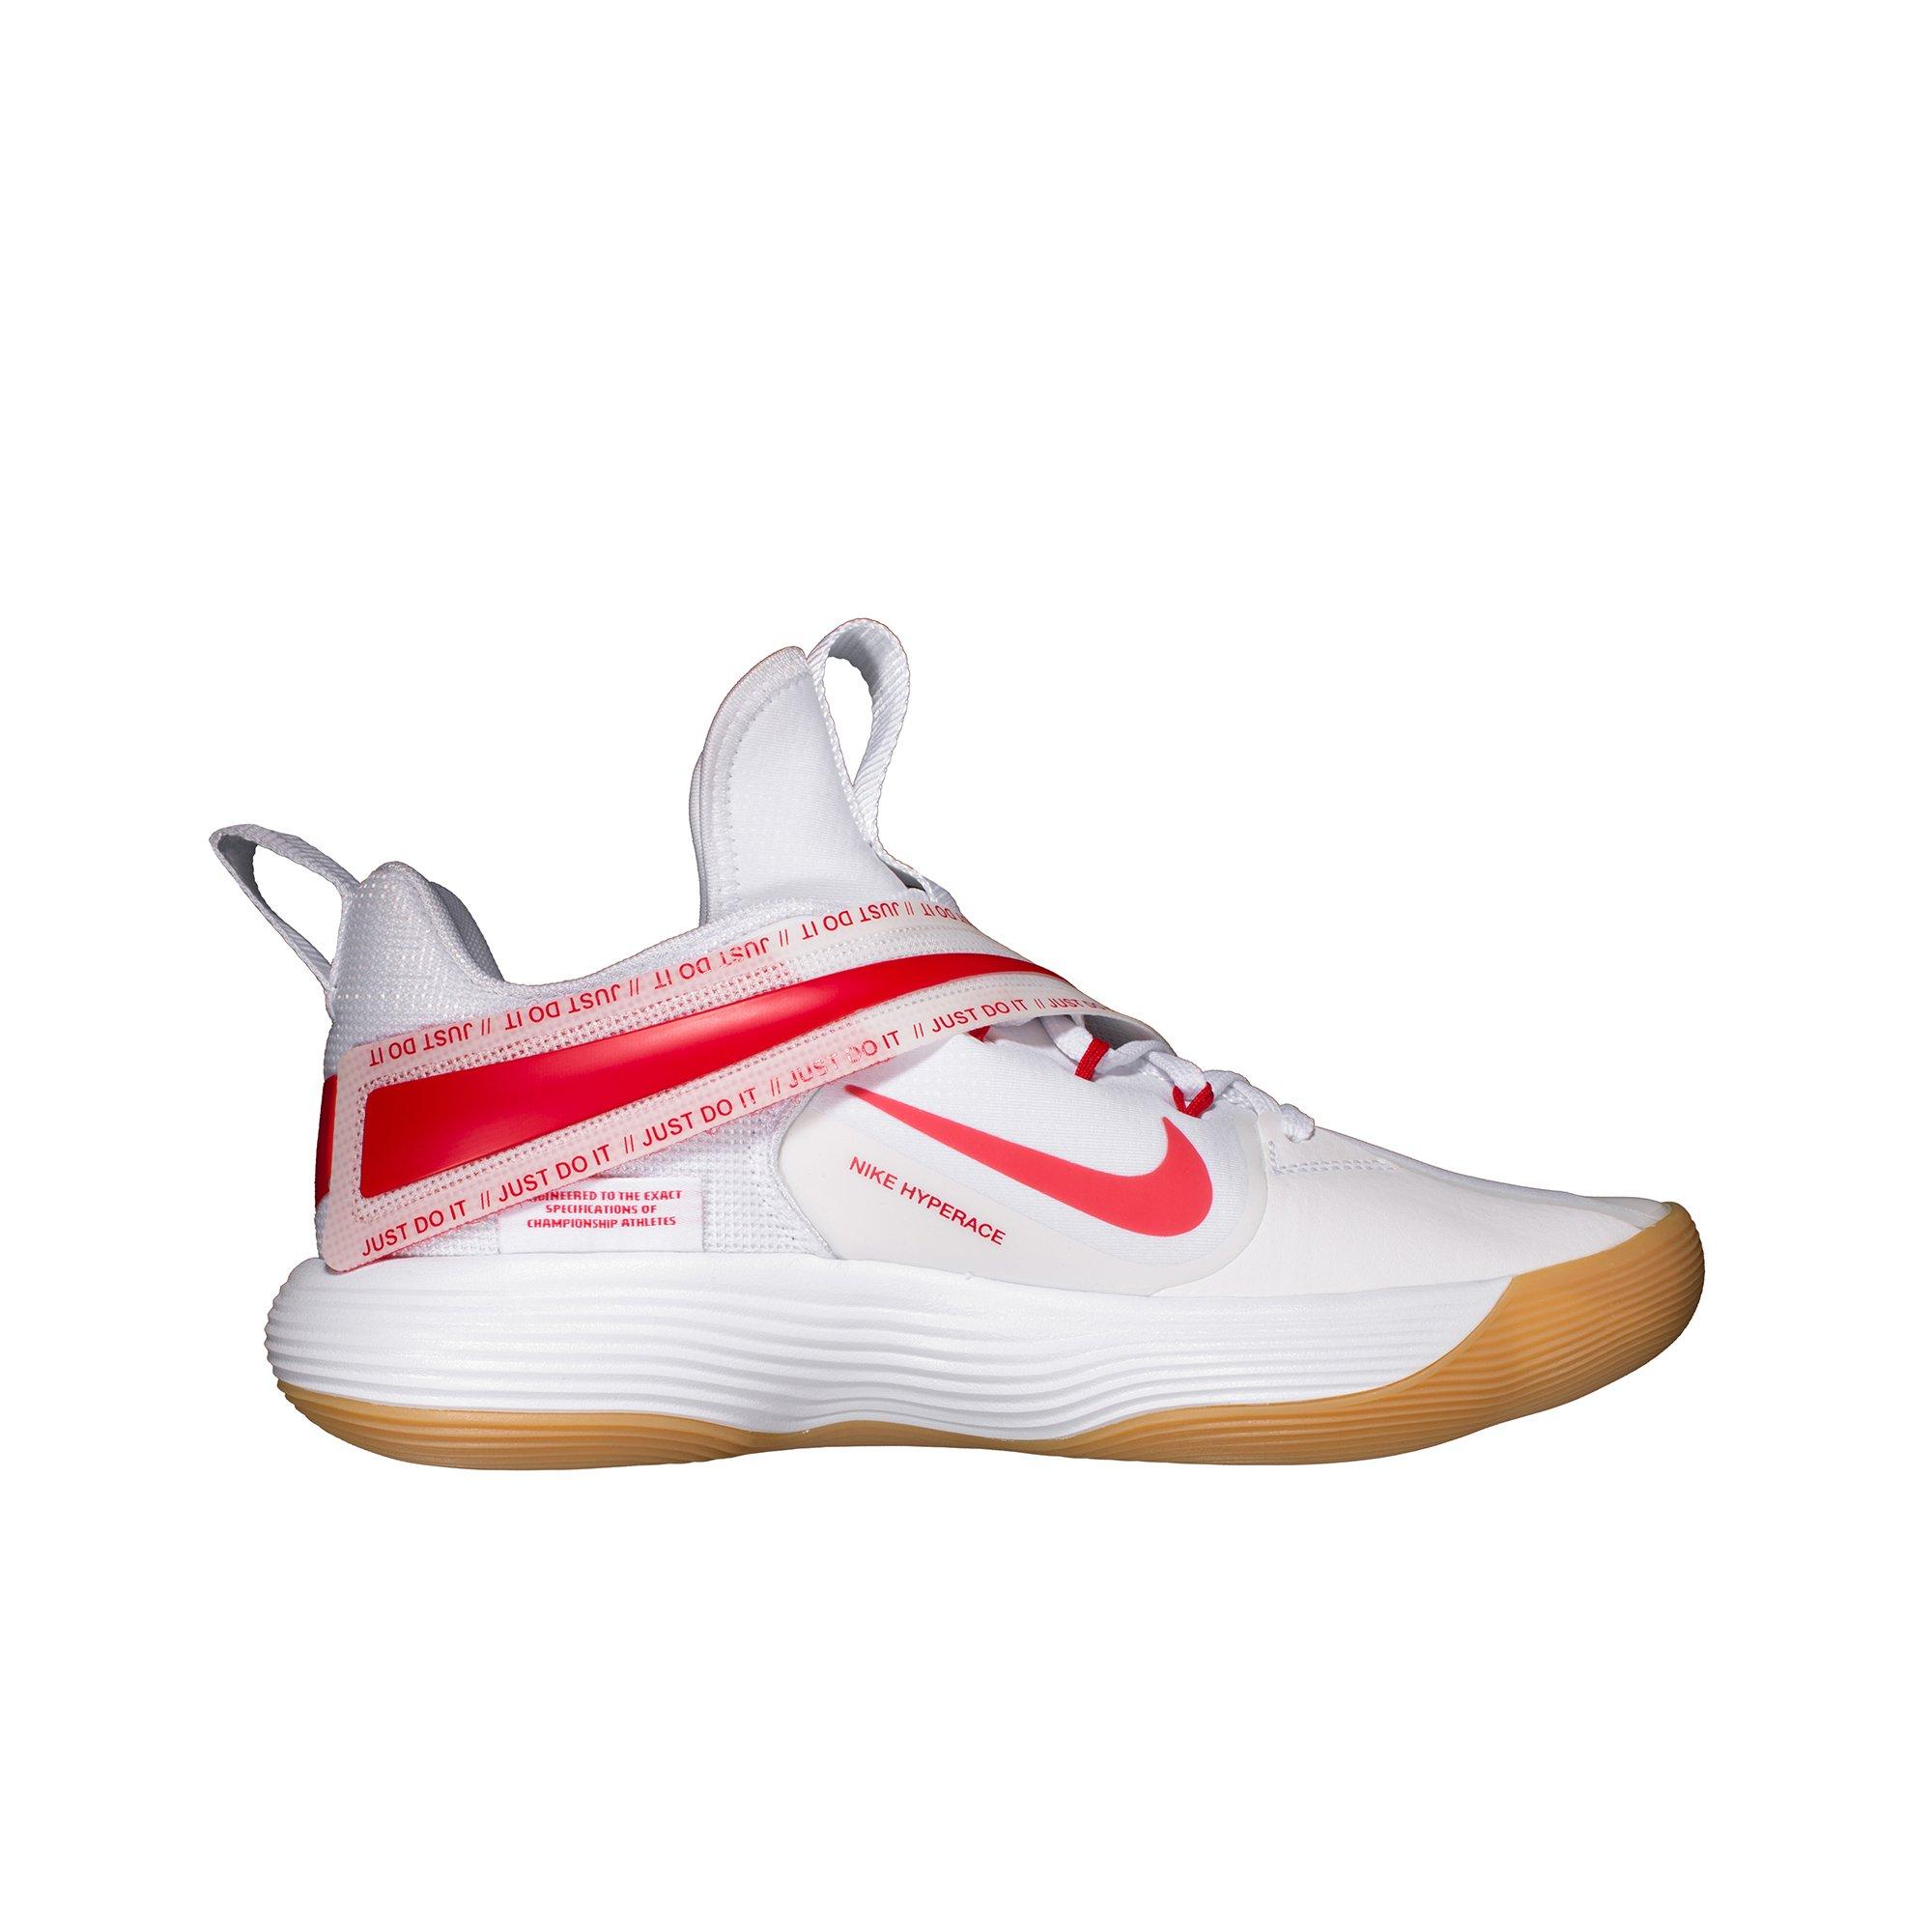 darse cuenta Señor exégesis Nike React HyperSet "White/University Red" Women's Volleyball Shoe